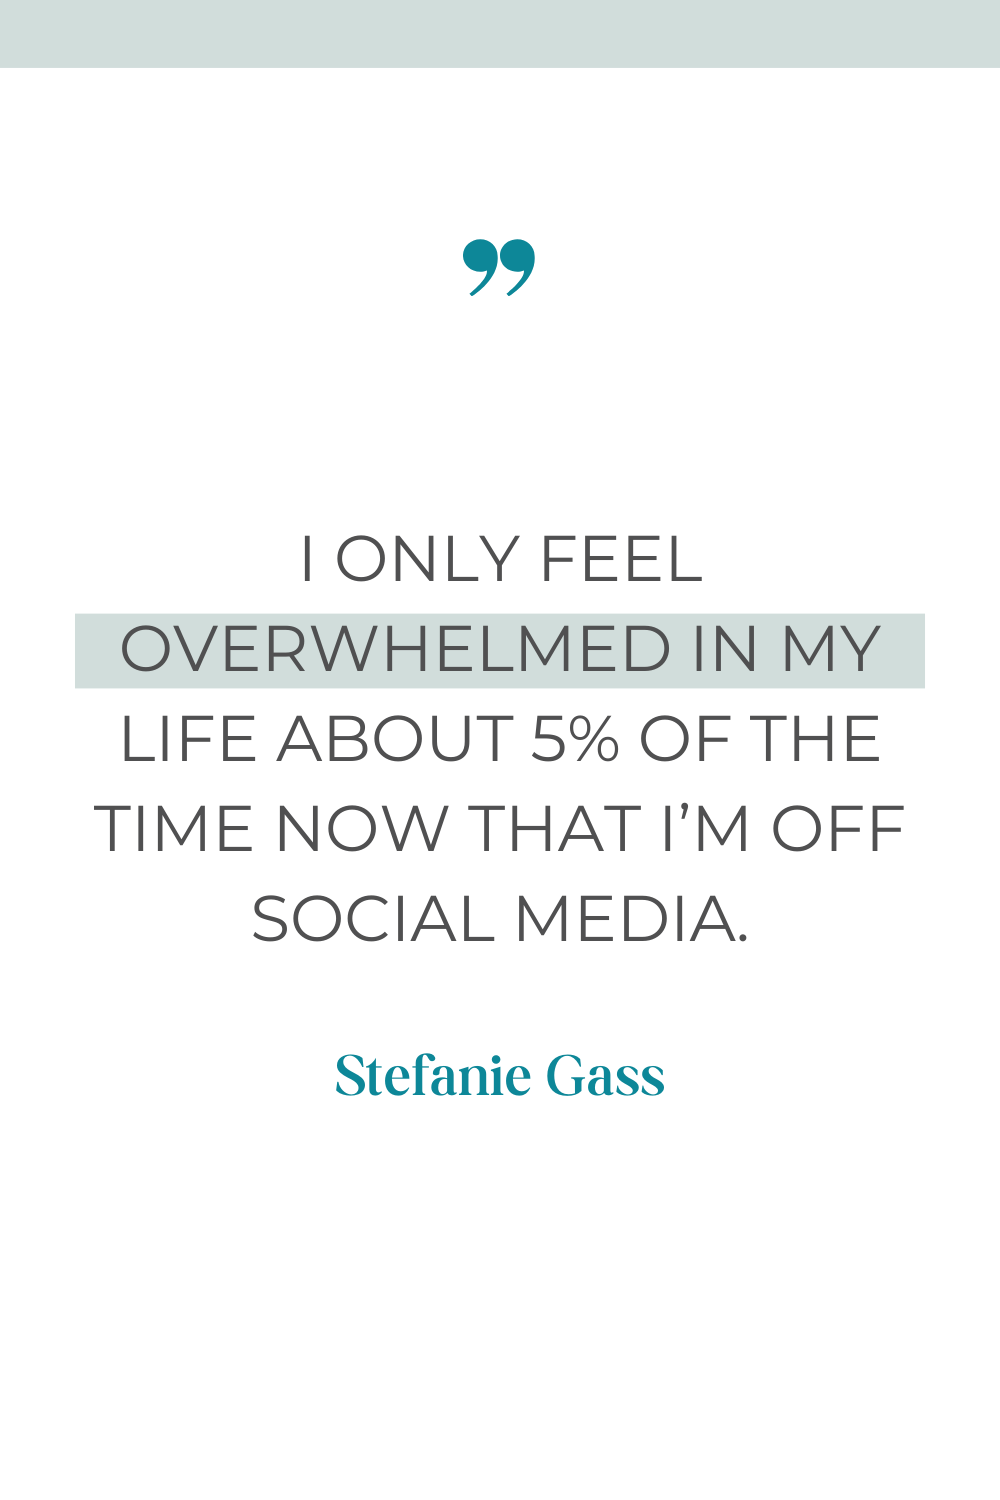 Stefanie Gass quote: I only feel overwhelmed in my life about 5% of the time now that I'm off social media.